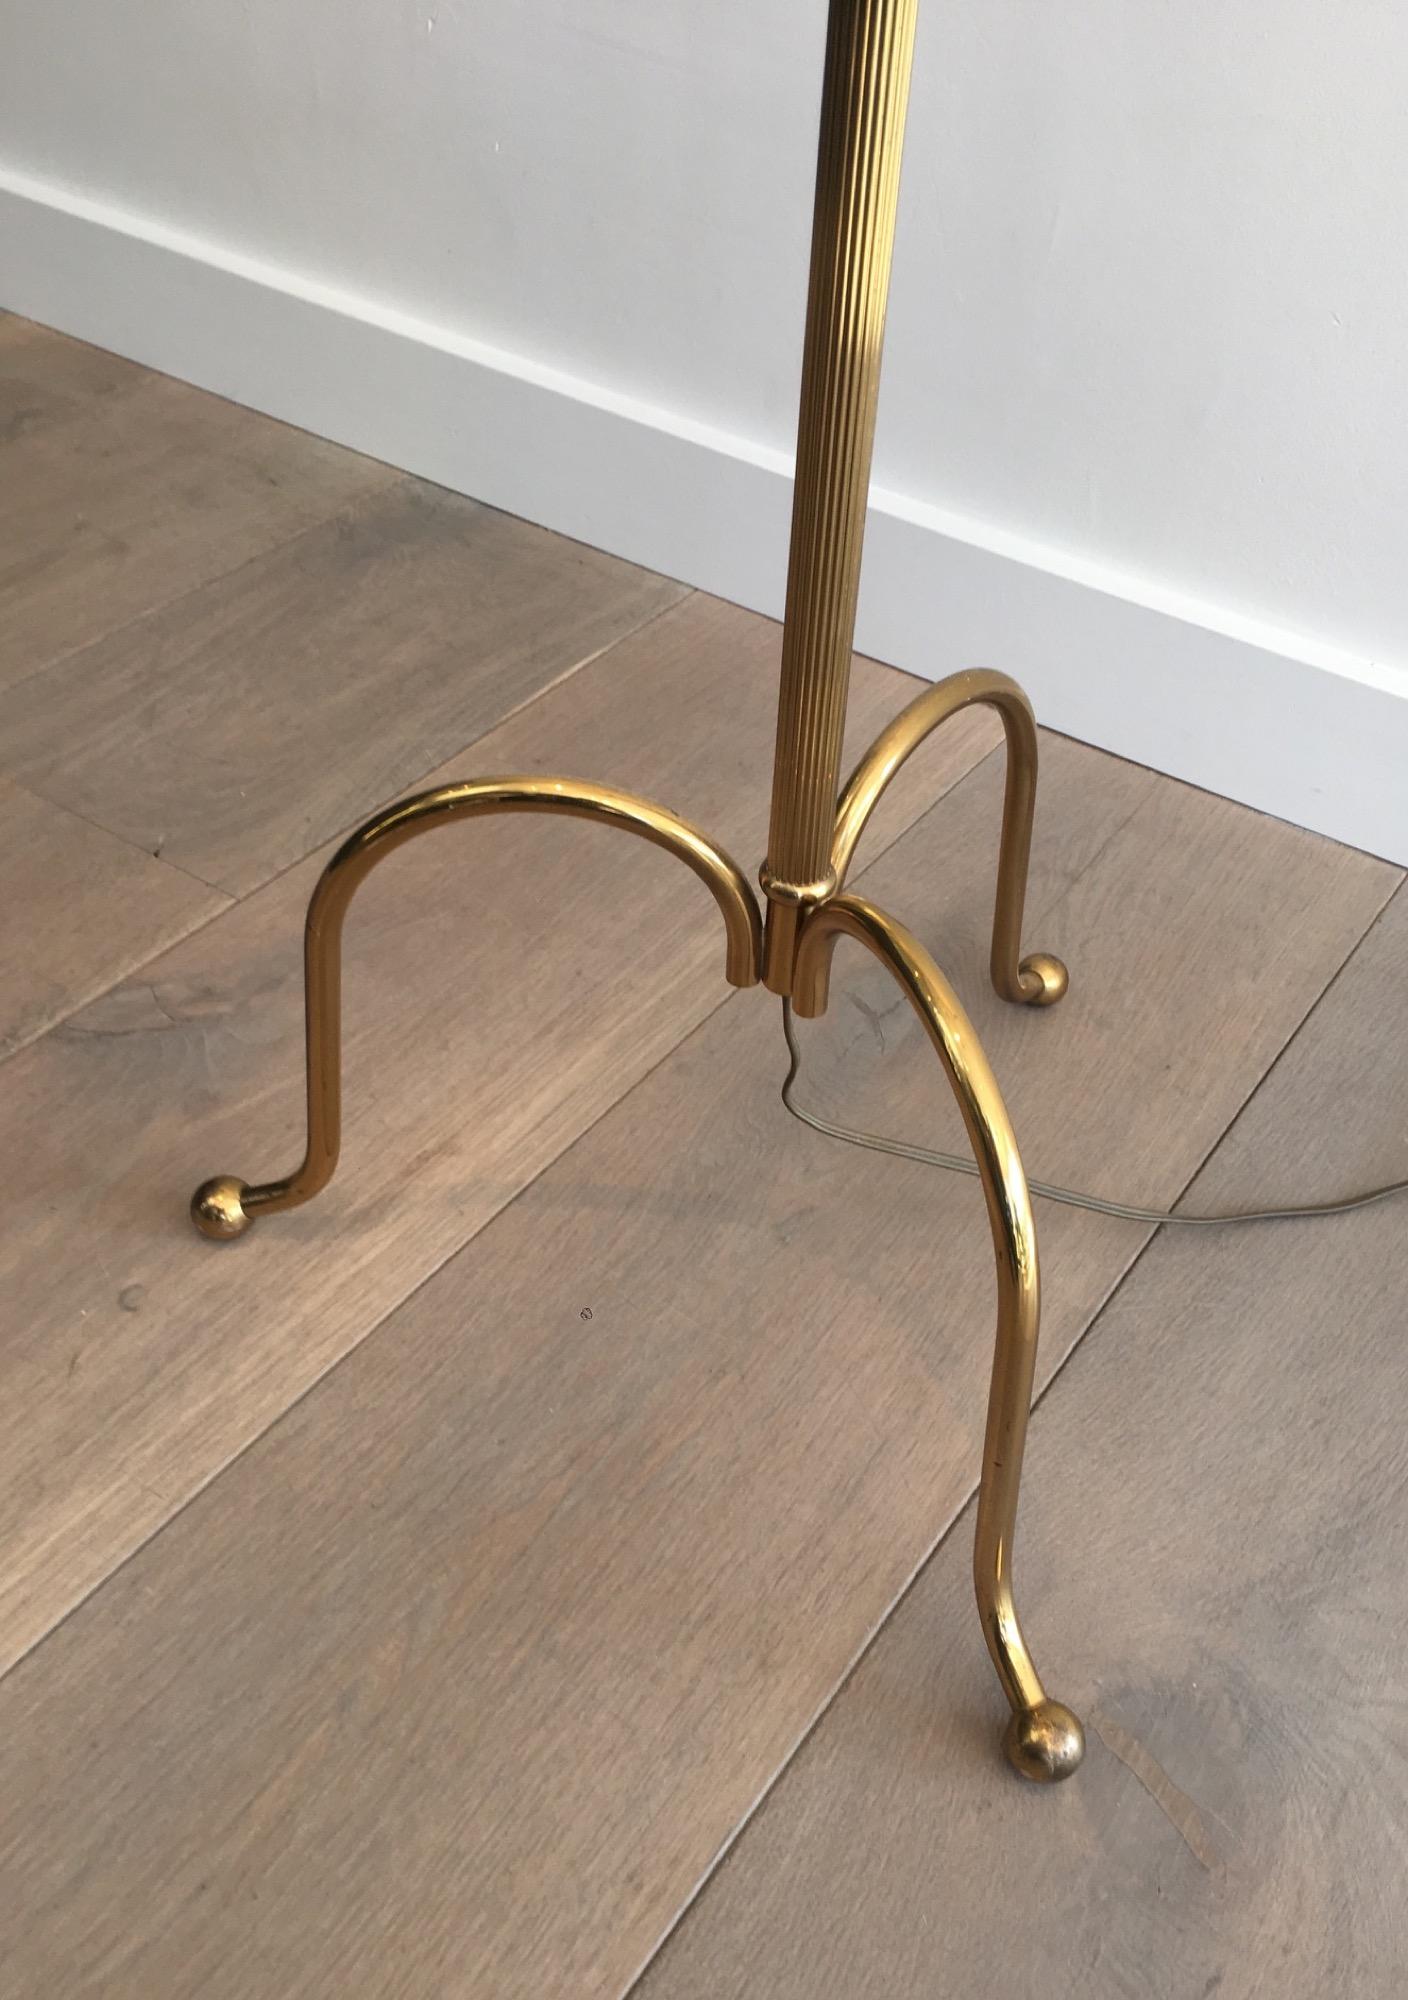 Neoclassical Tripode Brass Floor Lamp  For Sale 4